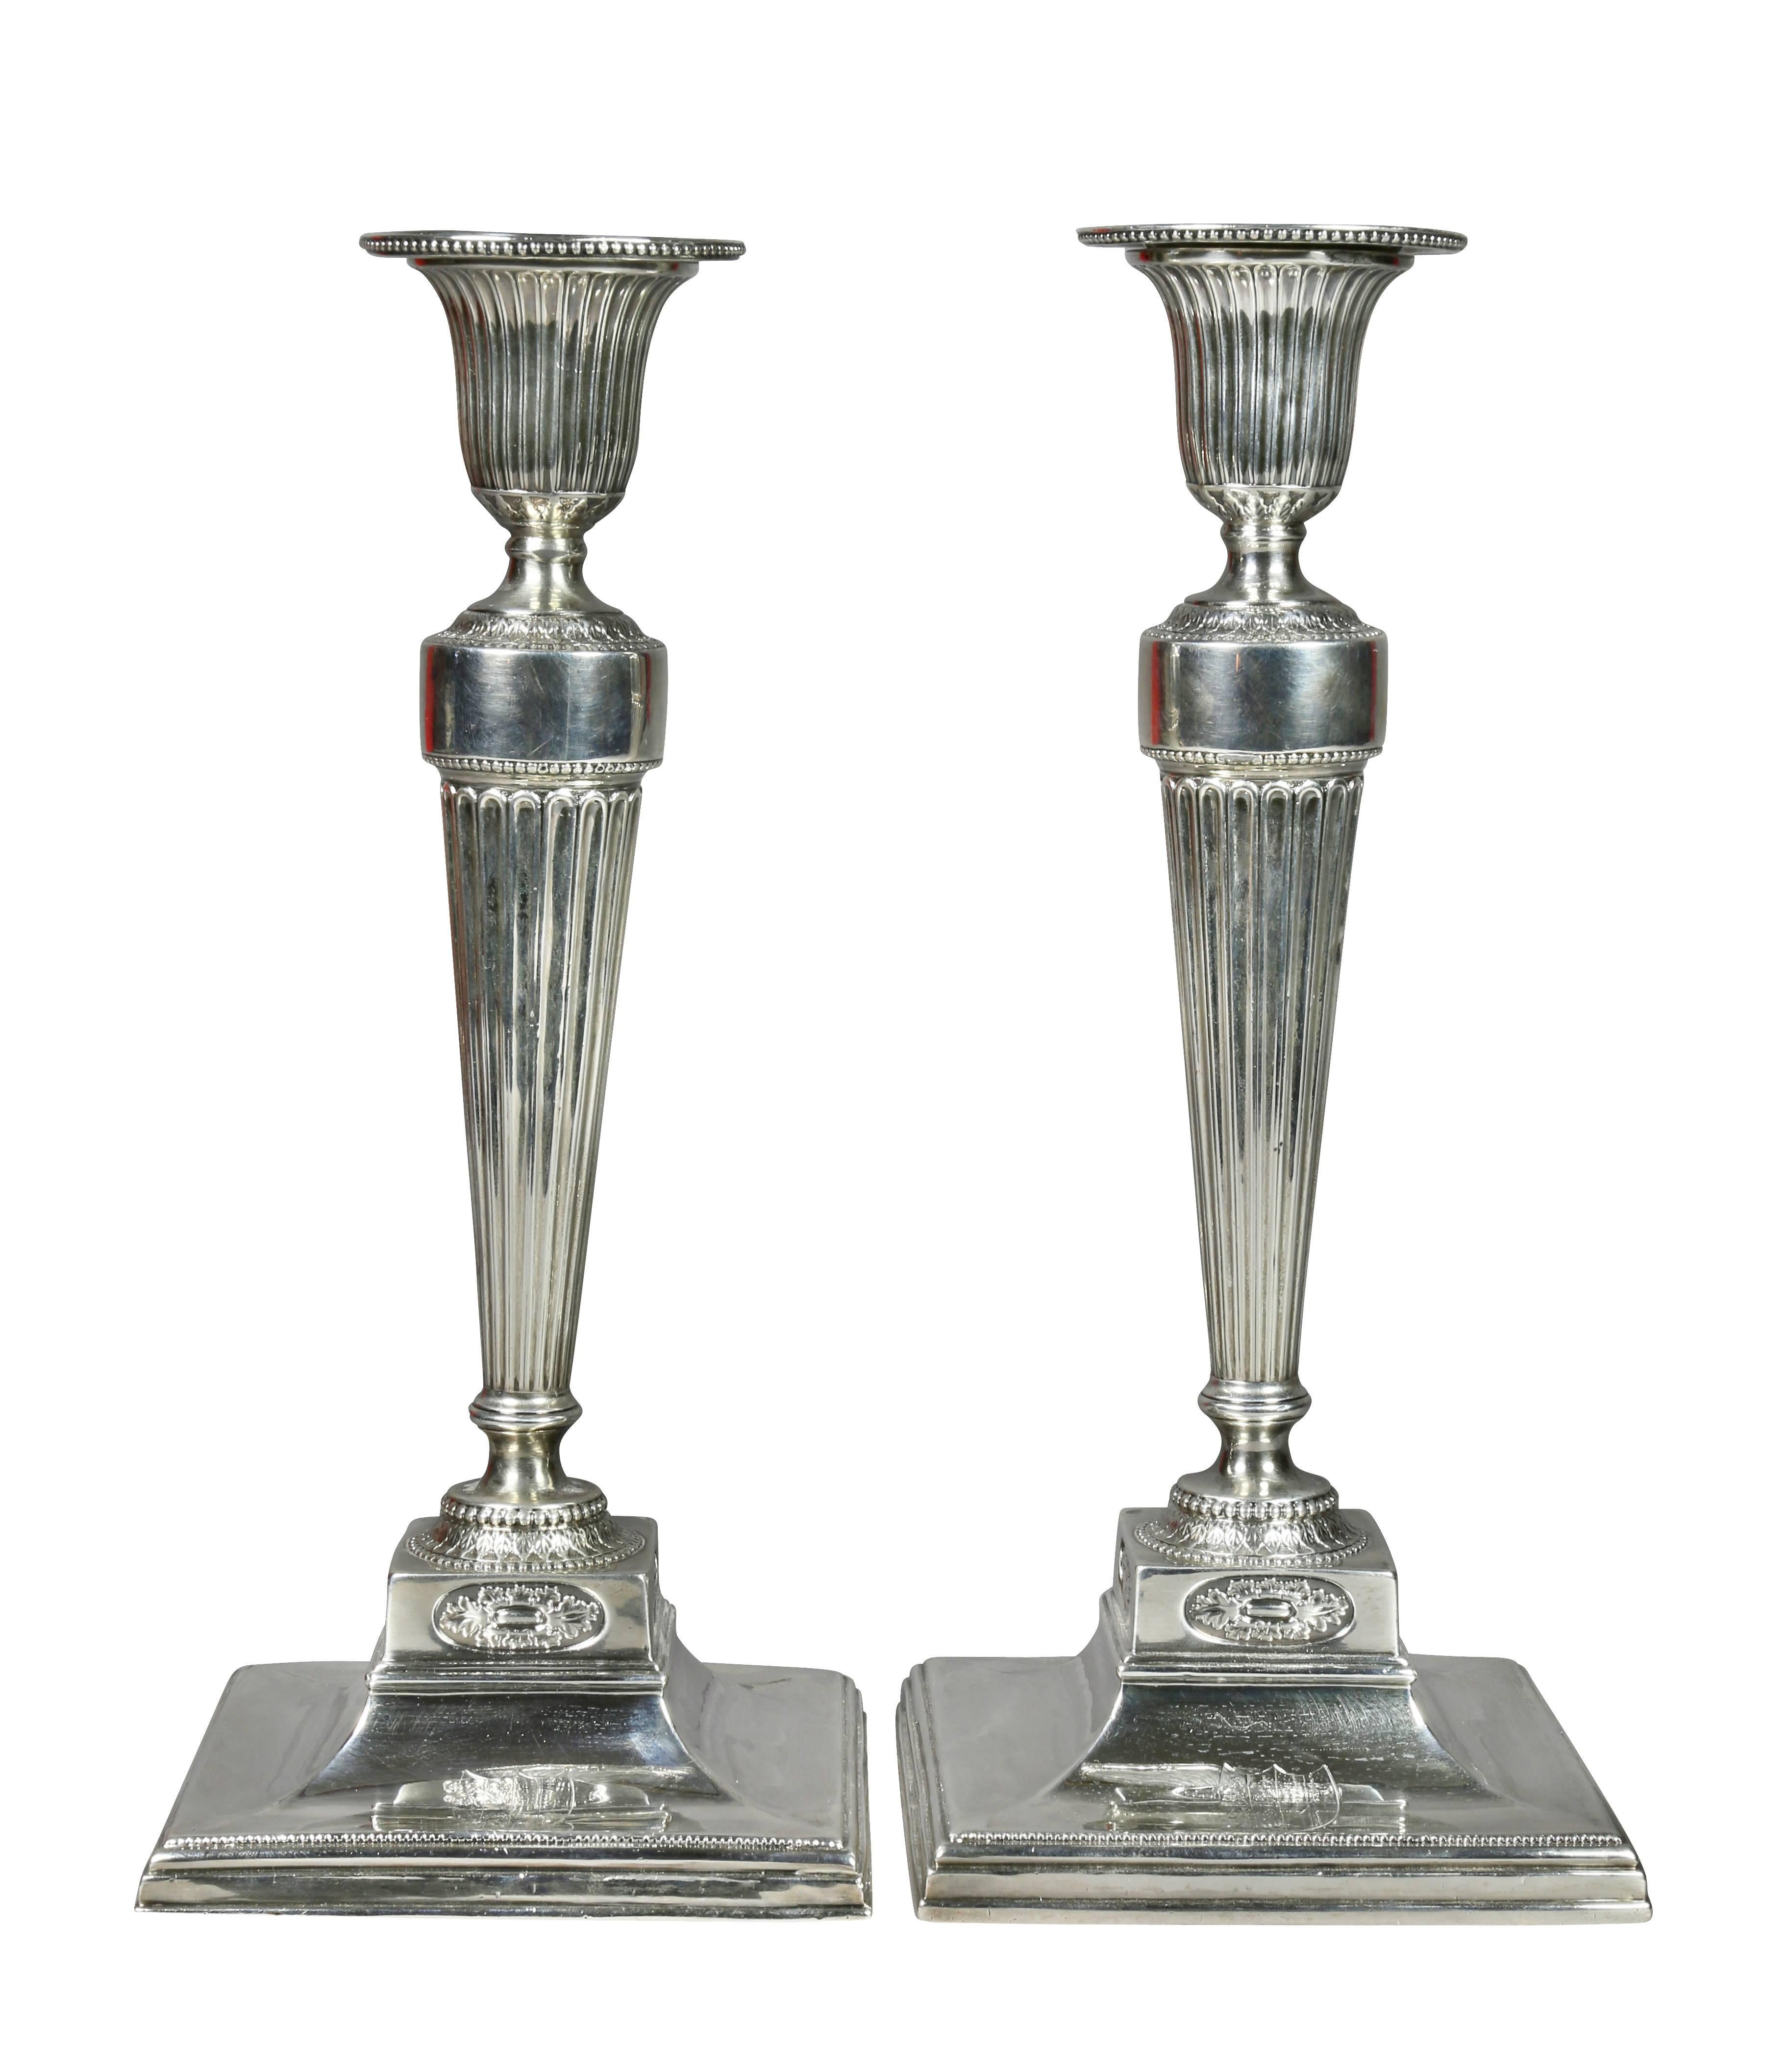 English Pair of George III Sterling Candlesticks